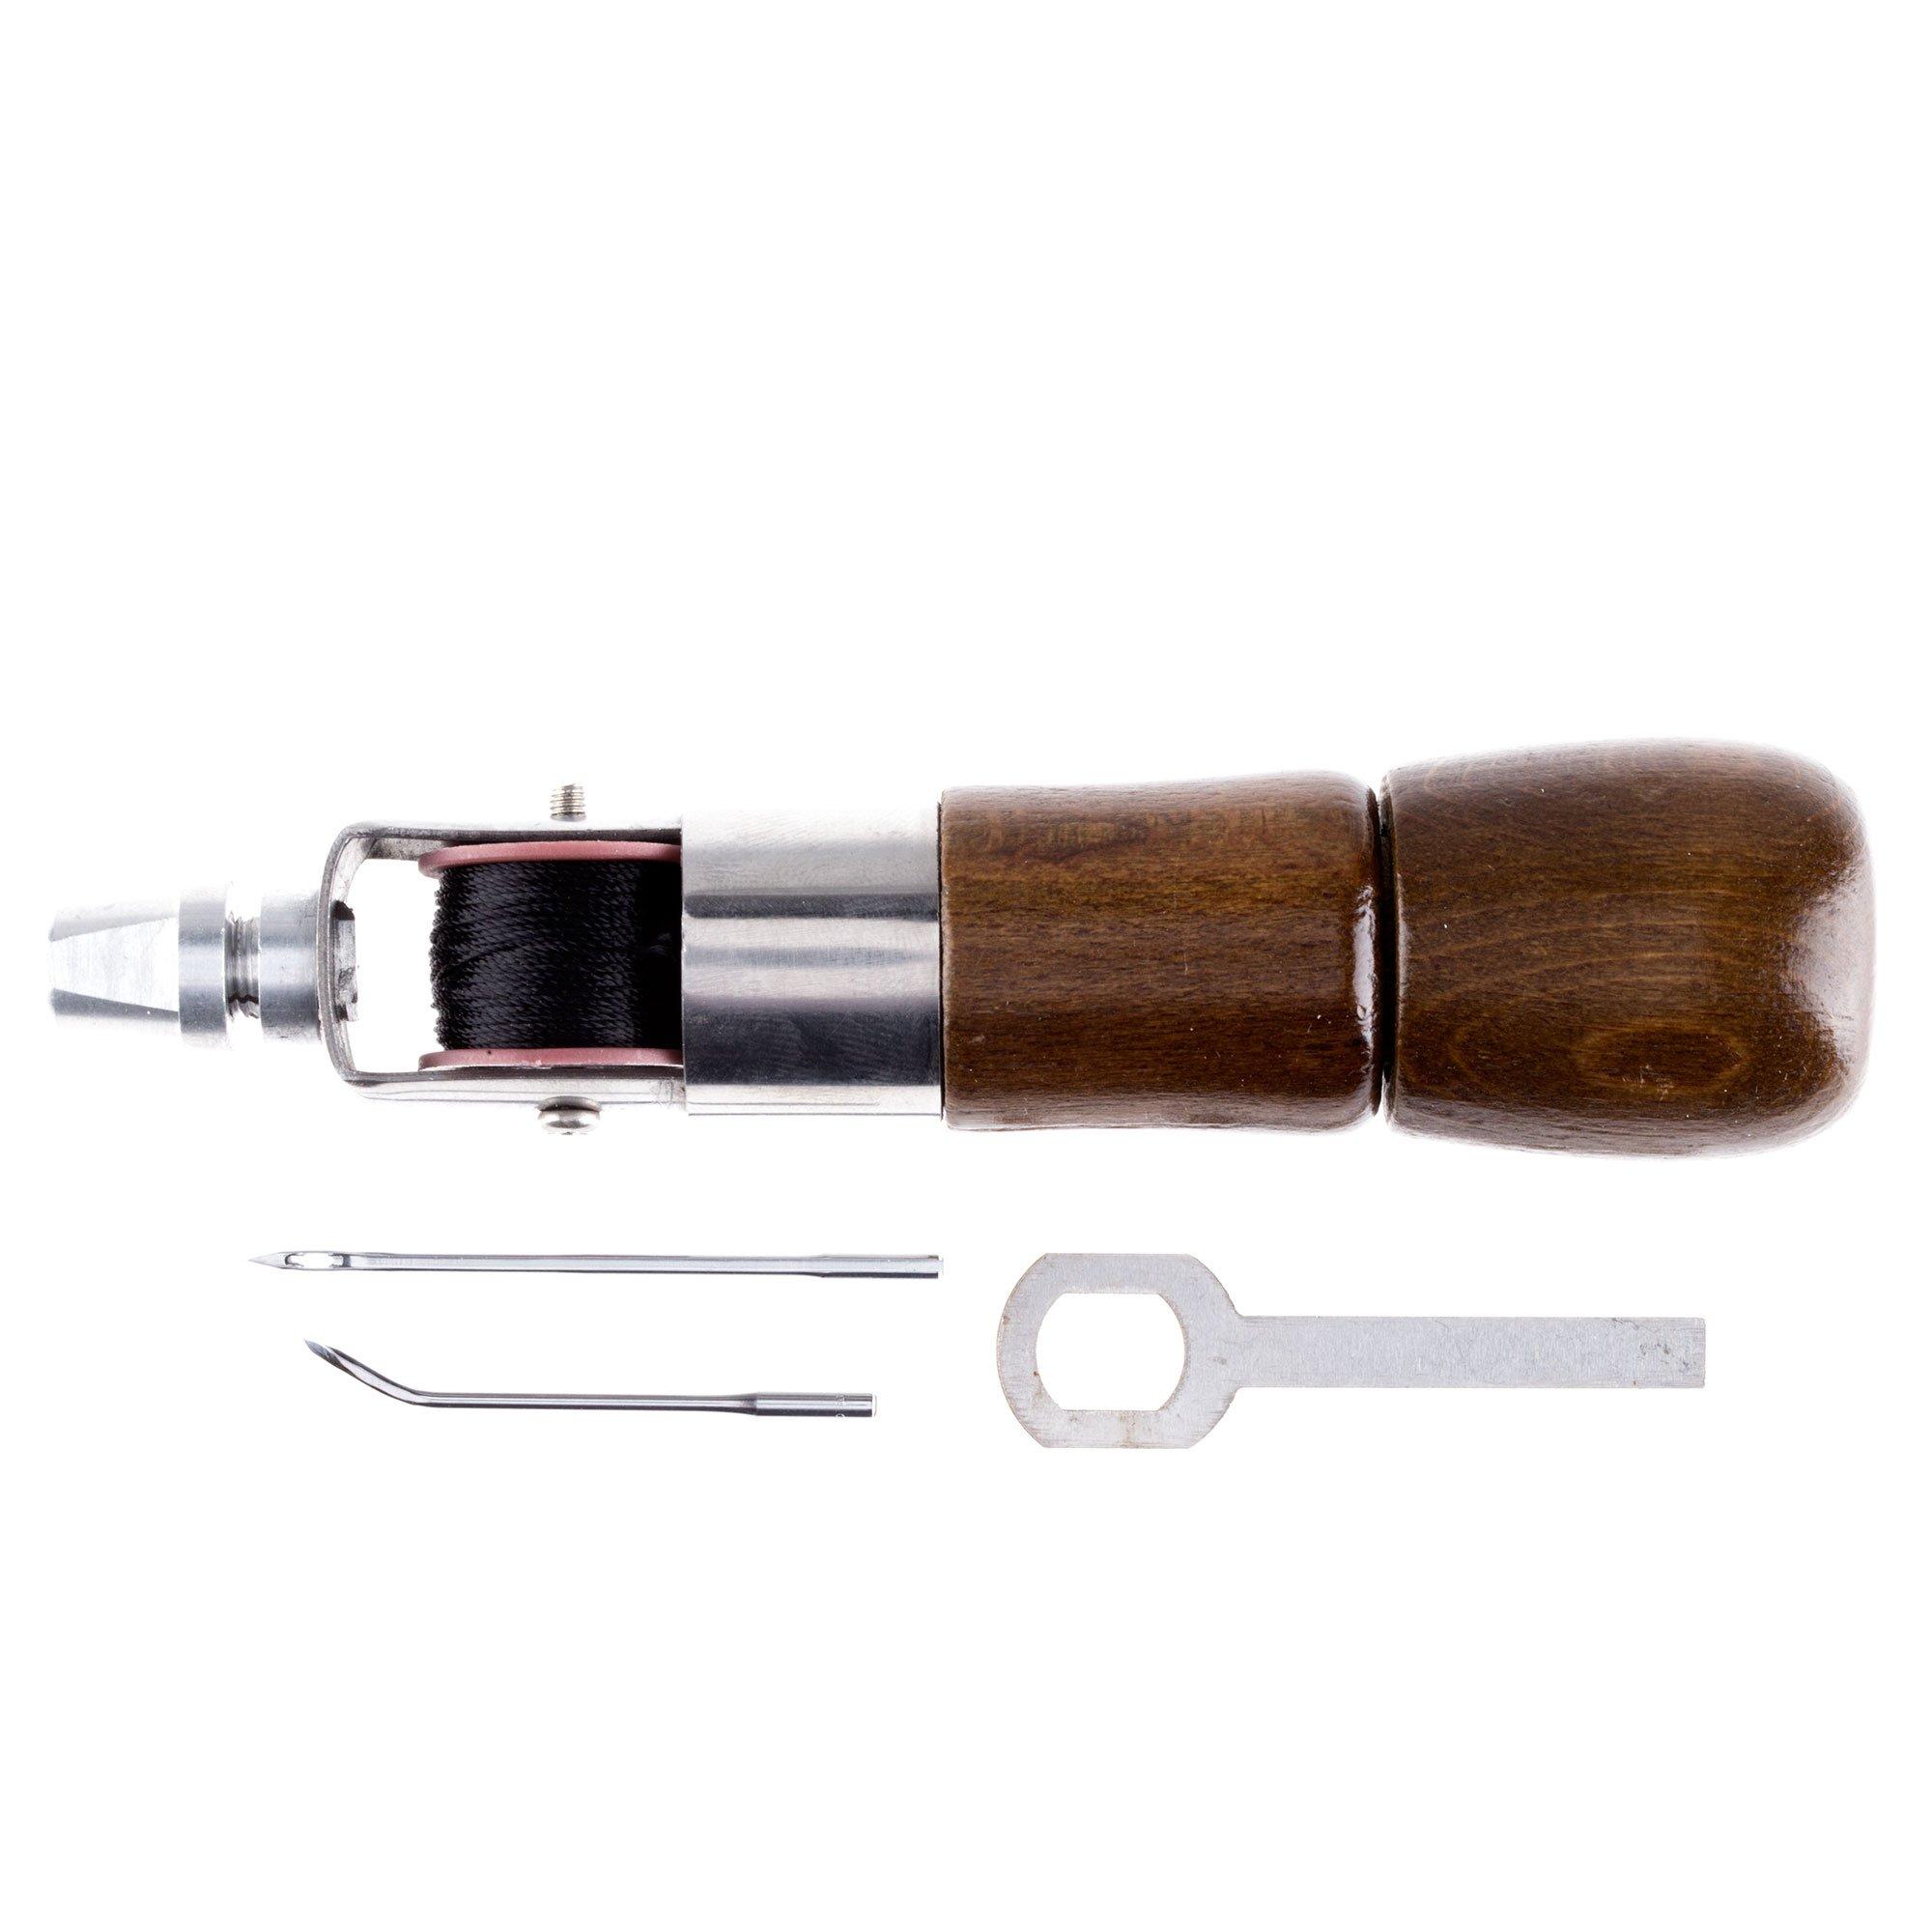 How To Use The Sewing Awl Kit On Leather 